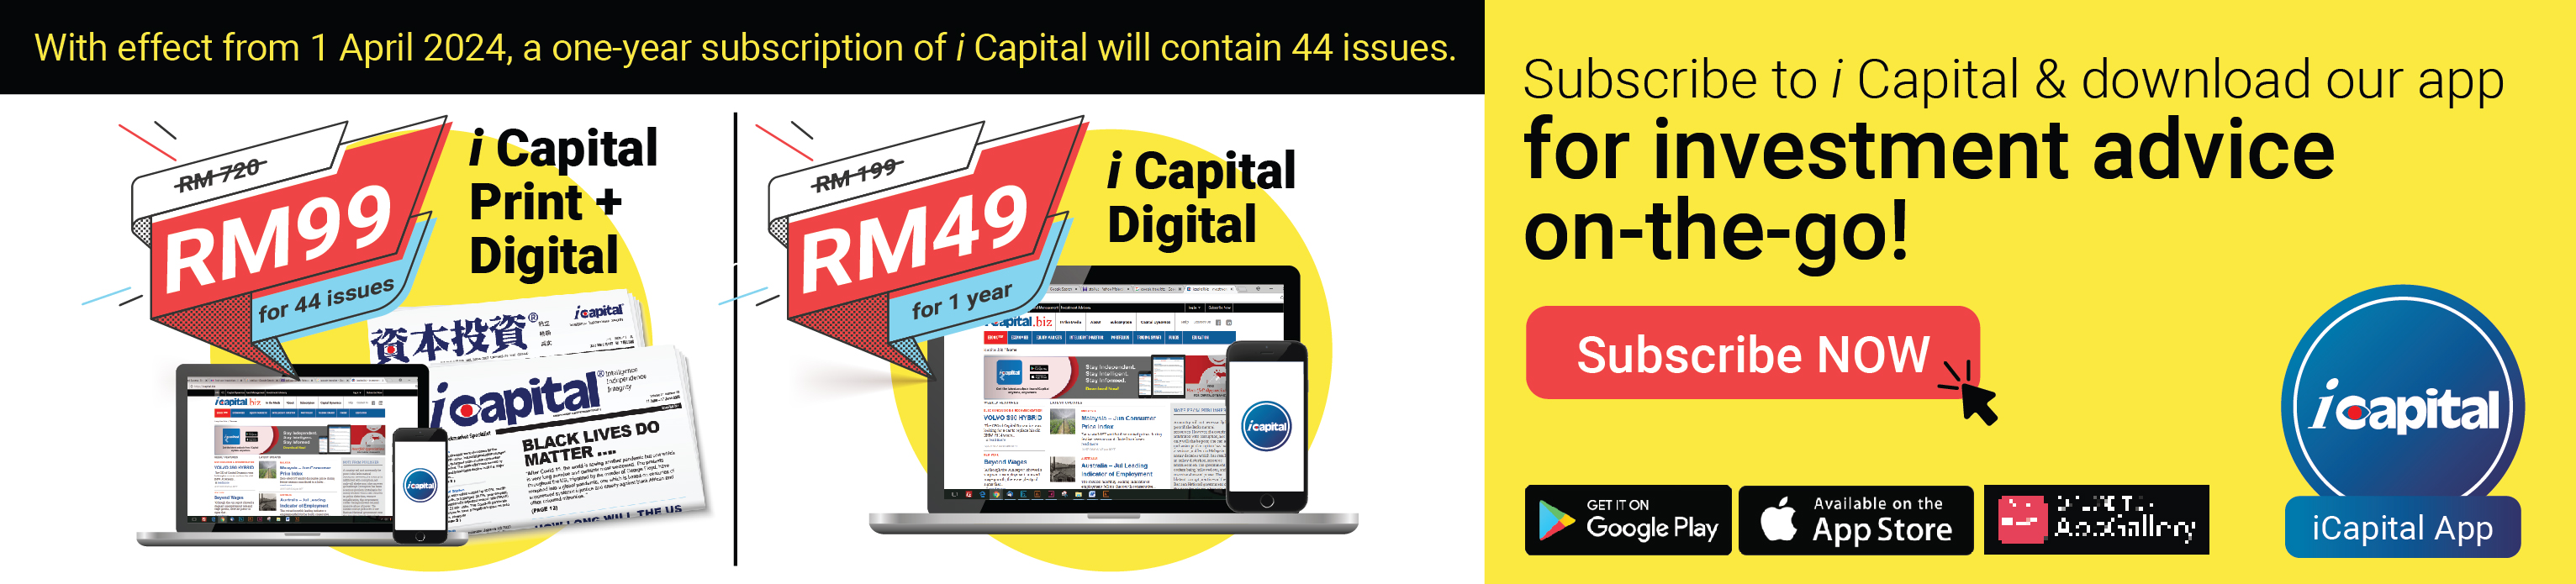 iCapital Mobile App